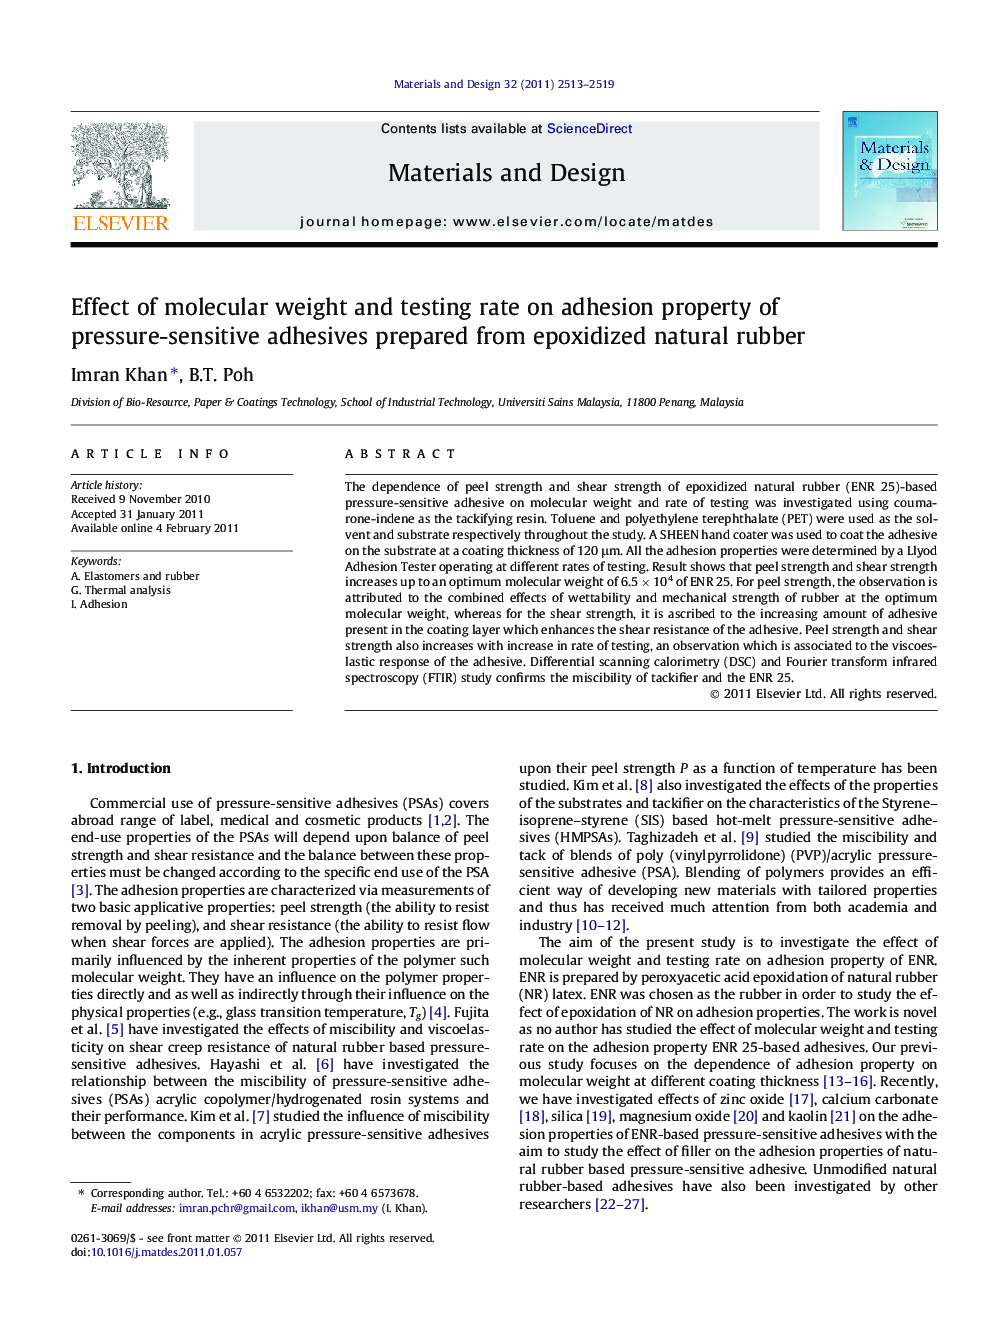 Effect of molecular weight and testing rate on adhesion property of pressure-sensitive adhesives prepared from epoxidized natural rubber